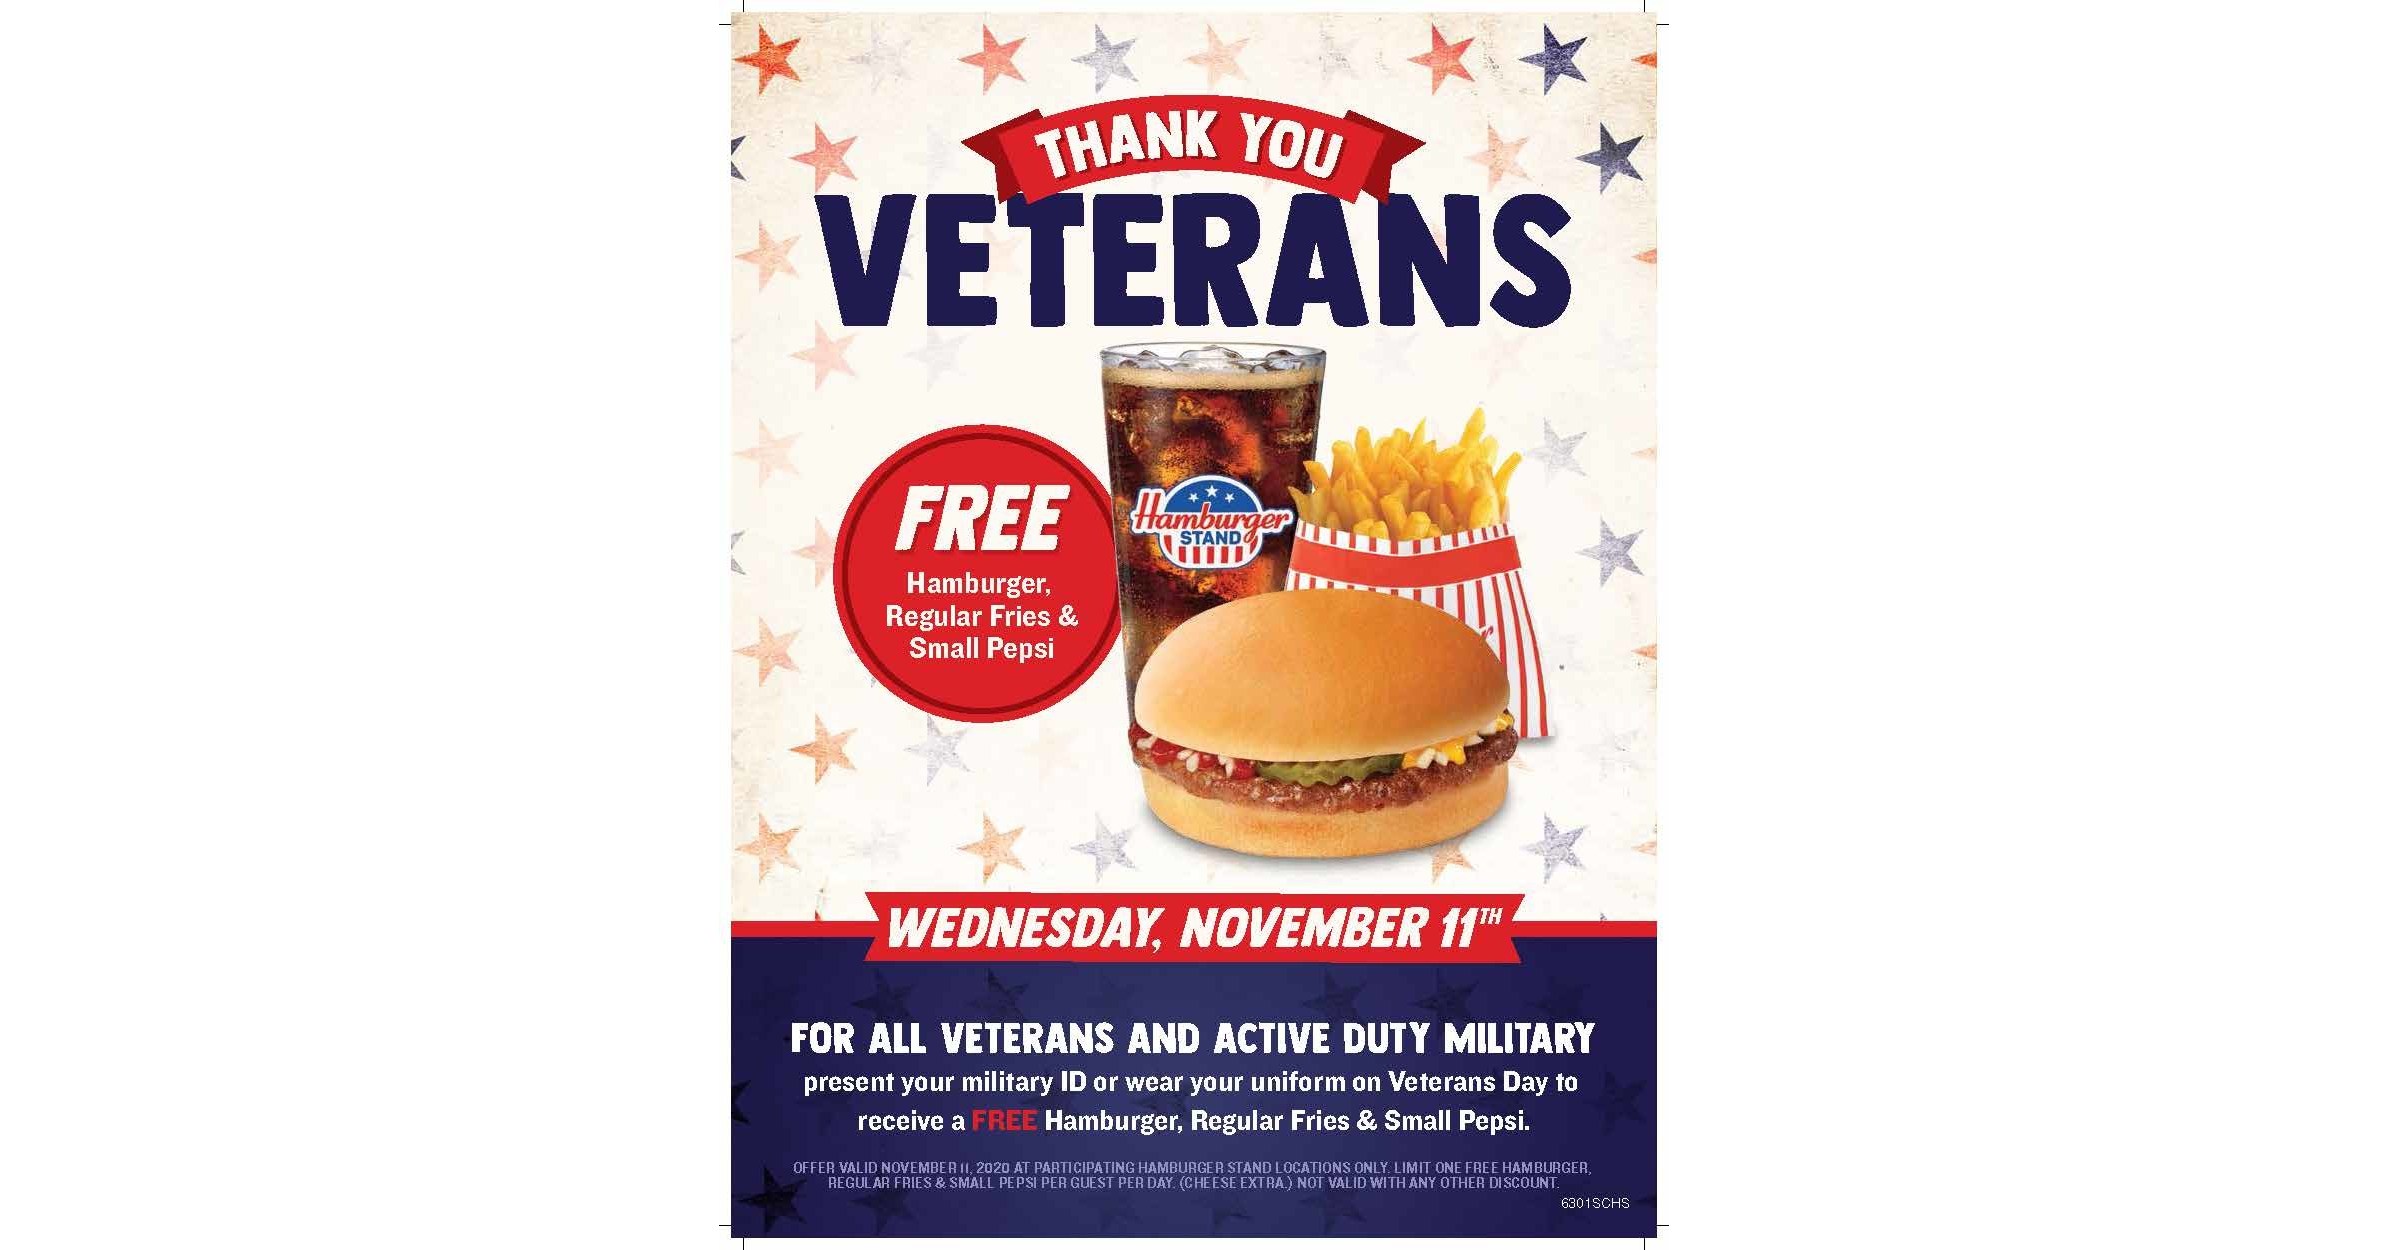 Hamburger Stand Offers Veterans & ActiveDuty Service Members a Free